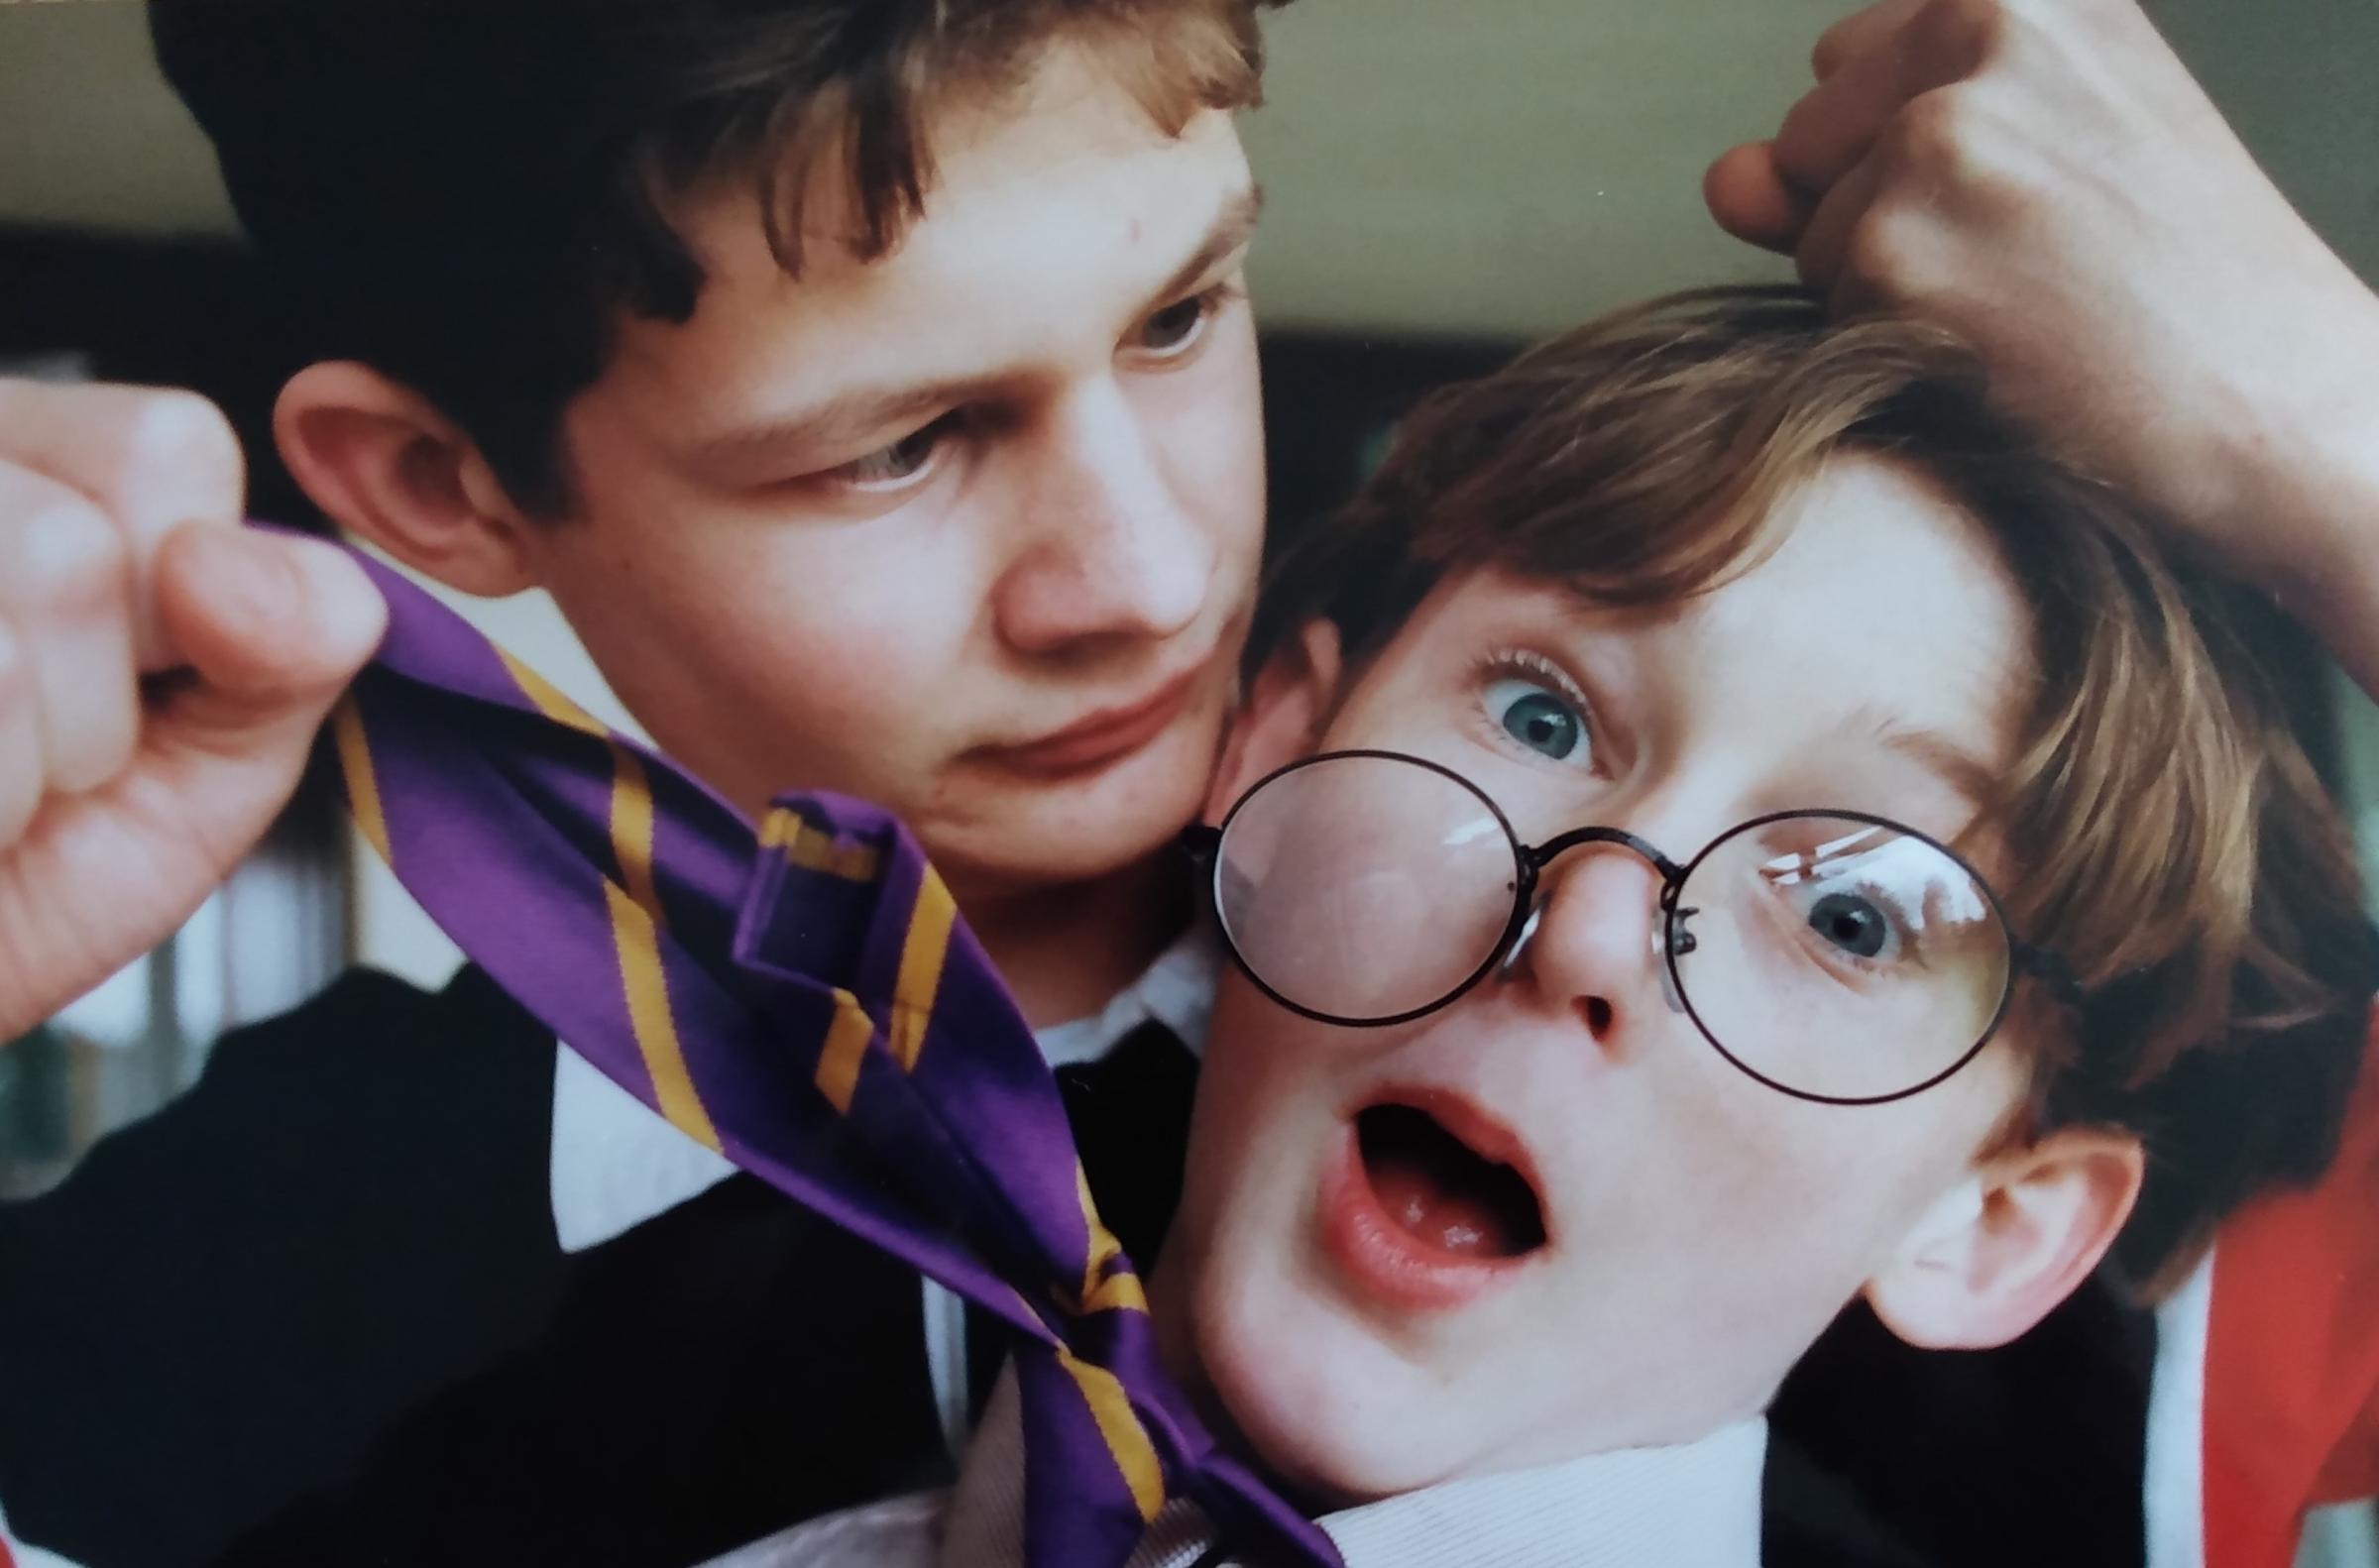 February 1995 saw a performance of The Secret Diary of Adrian Mole at the school. Adrian (Paul Beardsmore) is all tied up with the school bully, played by Greg Miller